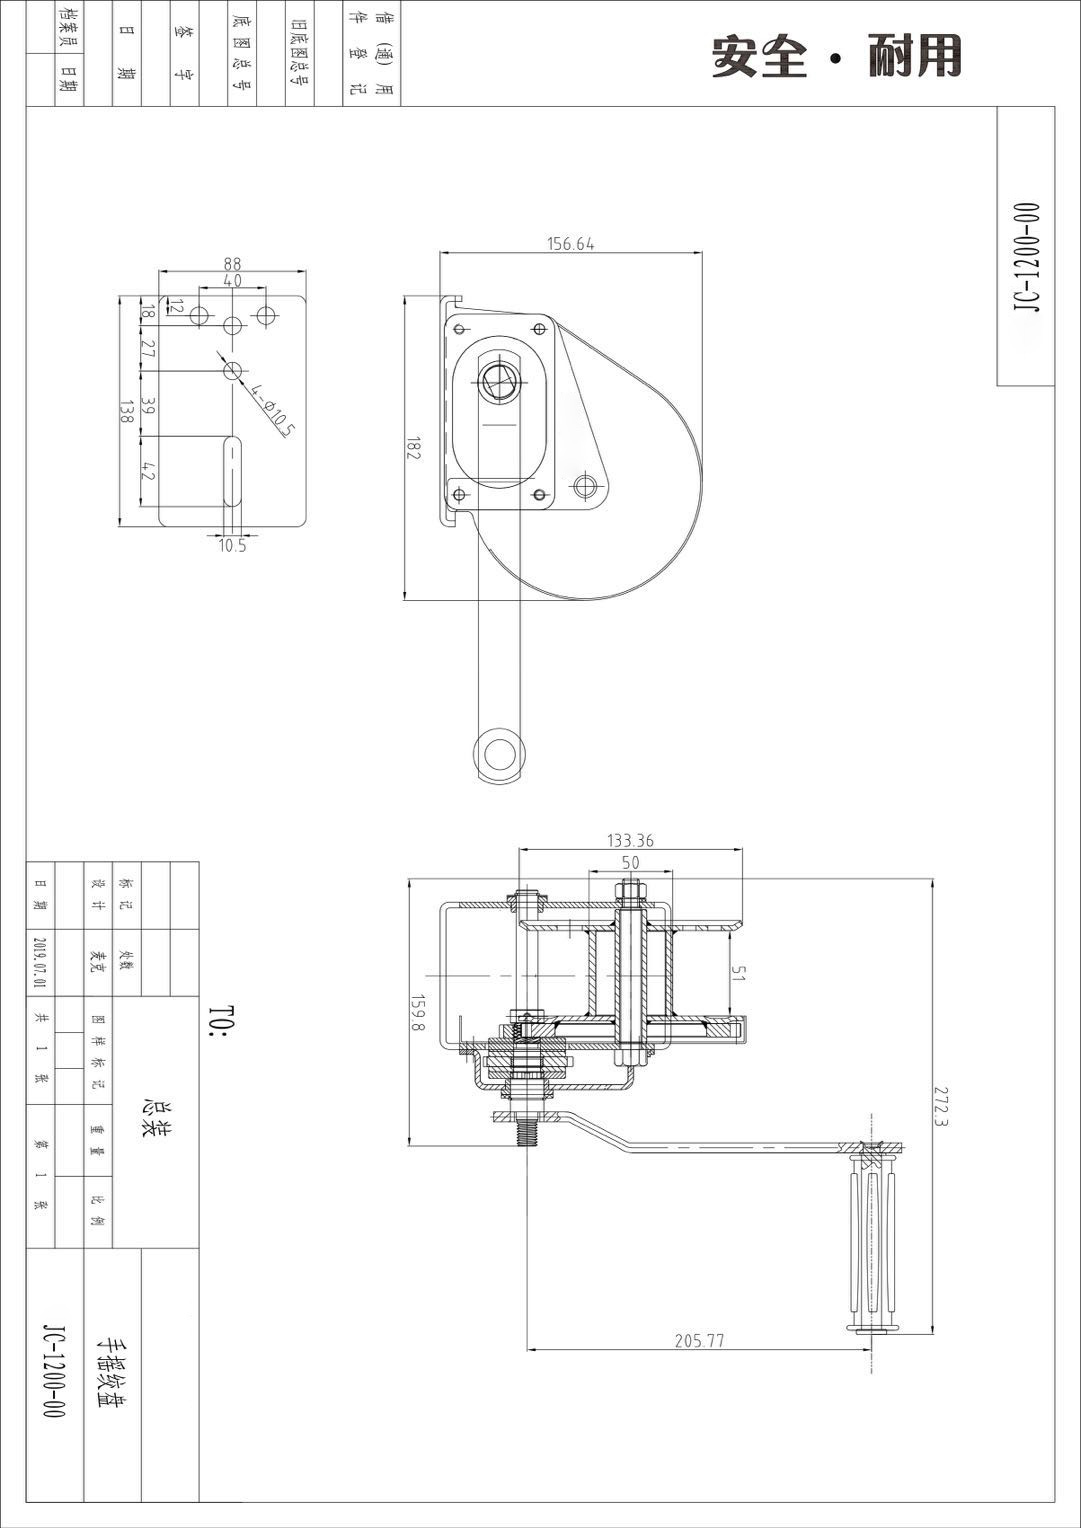 Technical drawing of 1200lbs Stainless Steel manual winch.jpg